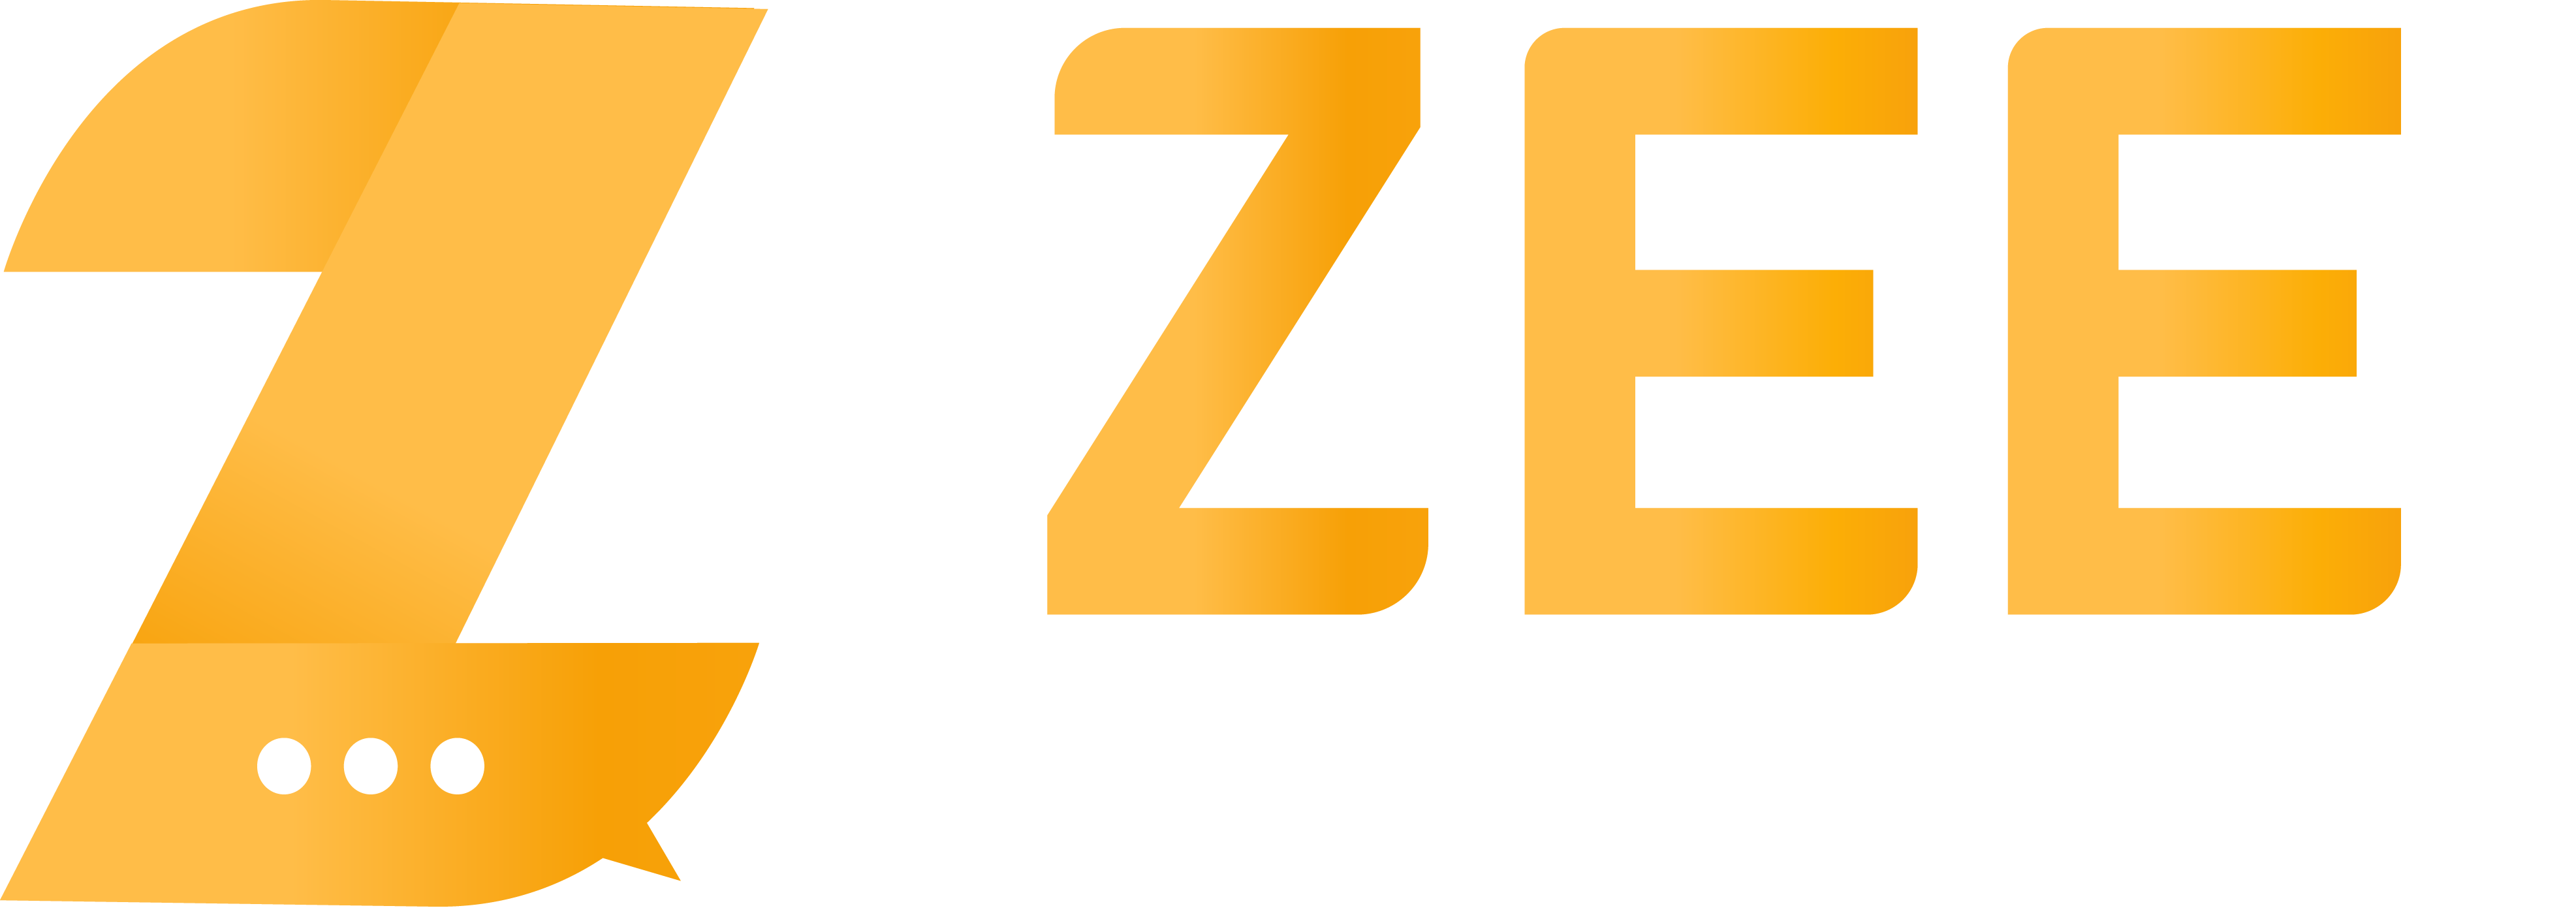 Details more than 132 zee logo